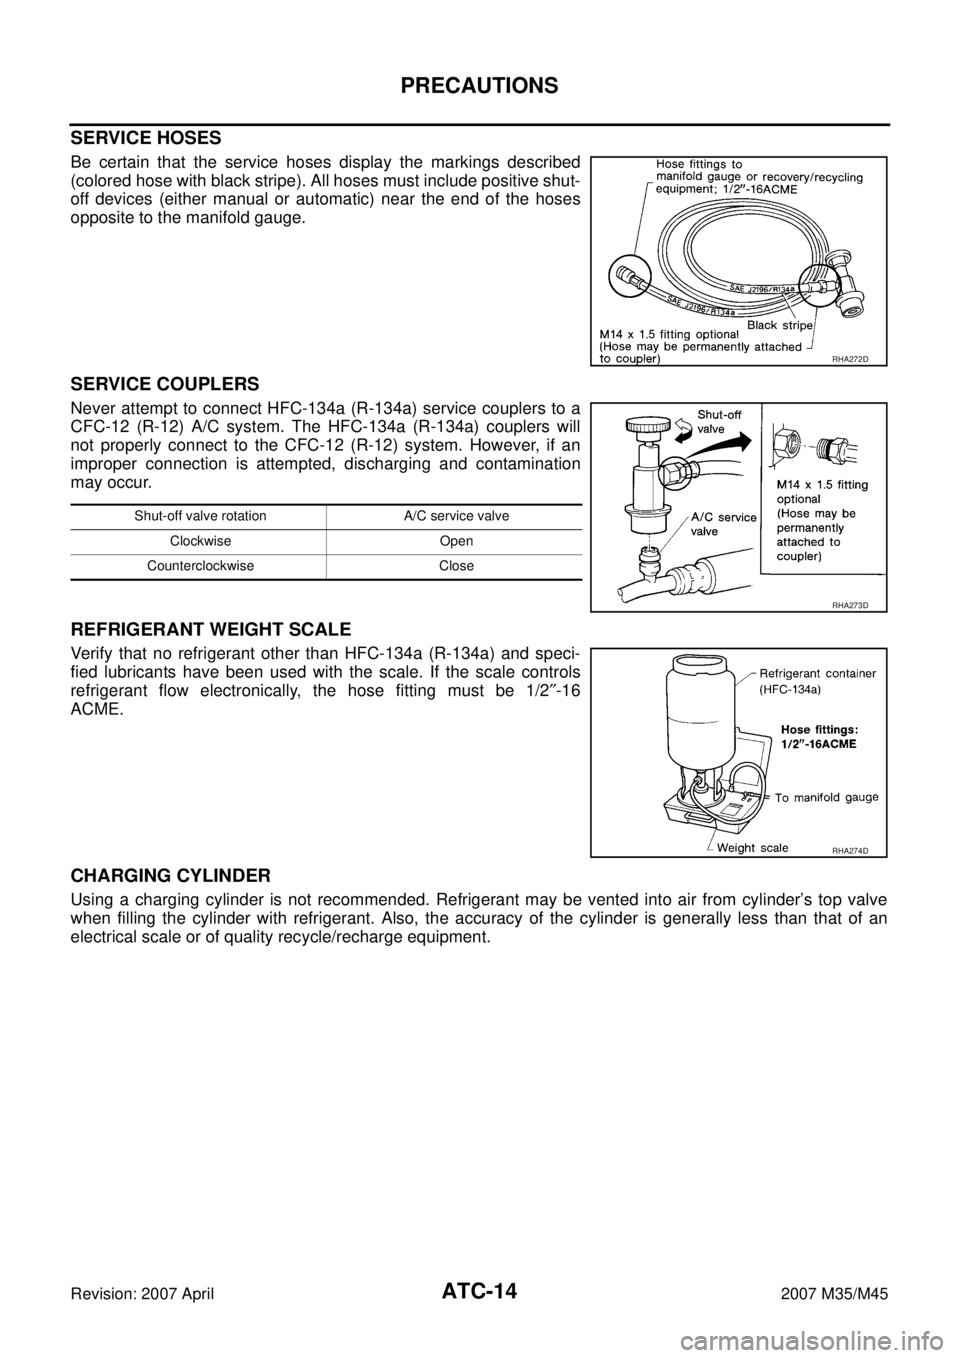 INFINITI M35 2007  Factory Service Manual ATC-14
PRECAUTIONS
Revision: 2007 April2007 M35/M45
SERVICE HOSES
Be certain that the service hoses display the markings described
(colored hose with black stripe). All hoses must include positive shu